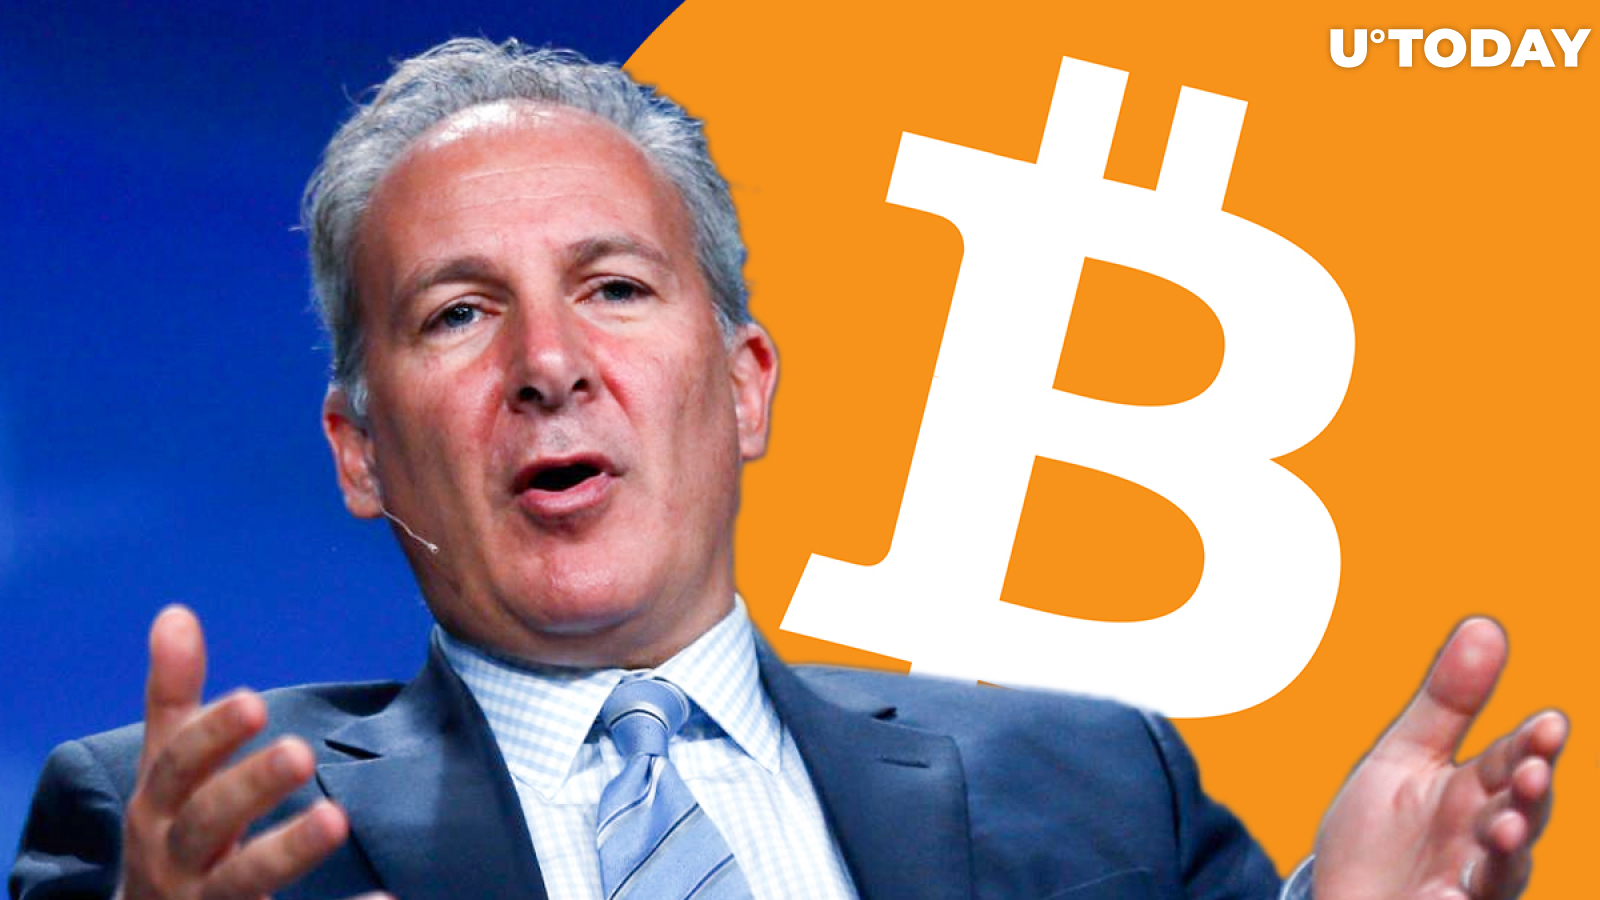 Each Time Bitcoin Rose Above $10,000, It Then Printed Big Fall—How Far Will BTC Plunge Now? Asks Peter Schiff